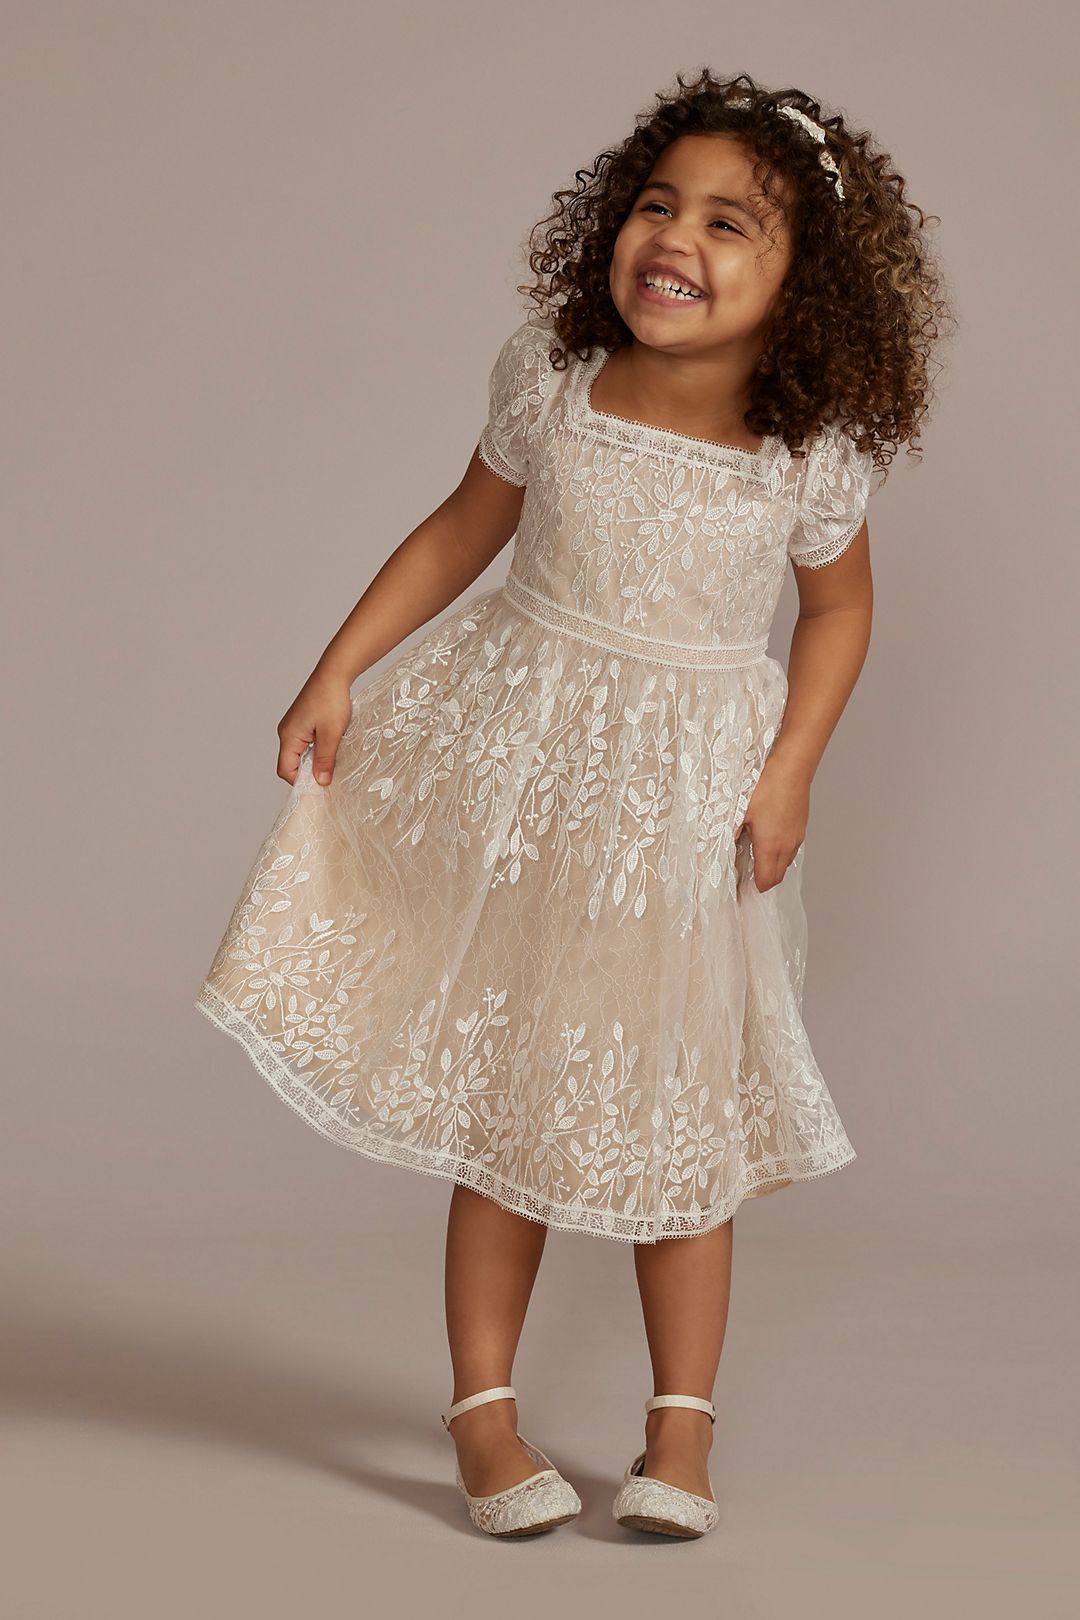 floral lace cap sleeve flower girl dress from david's bridal